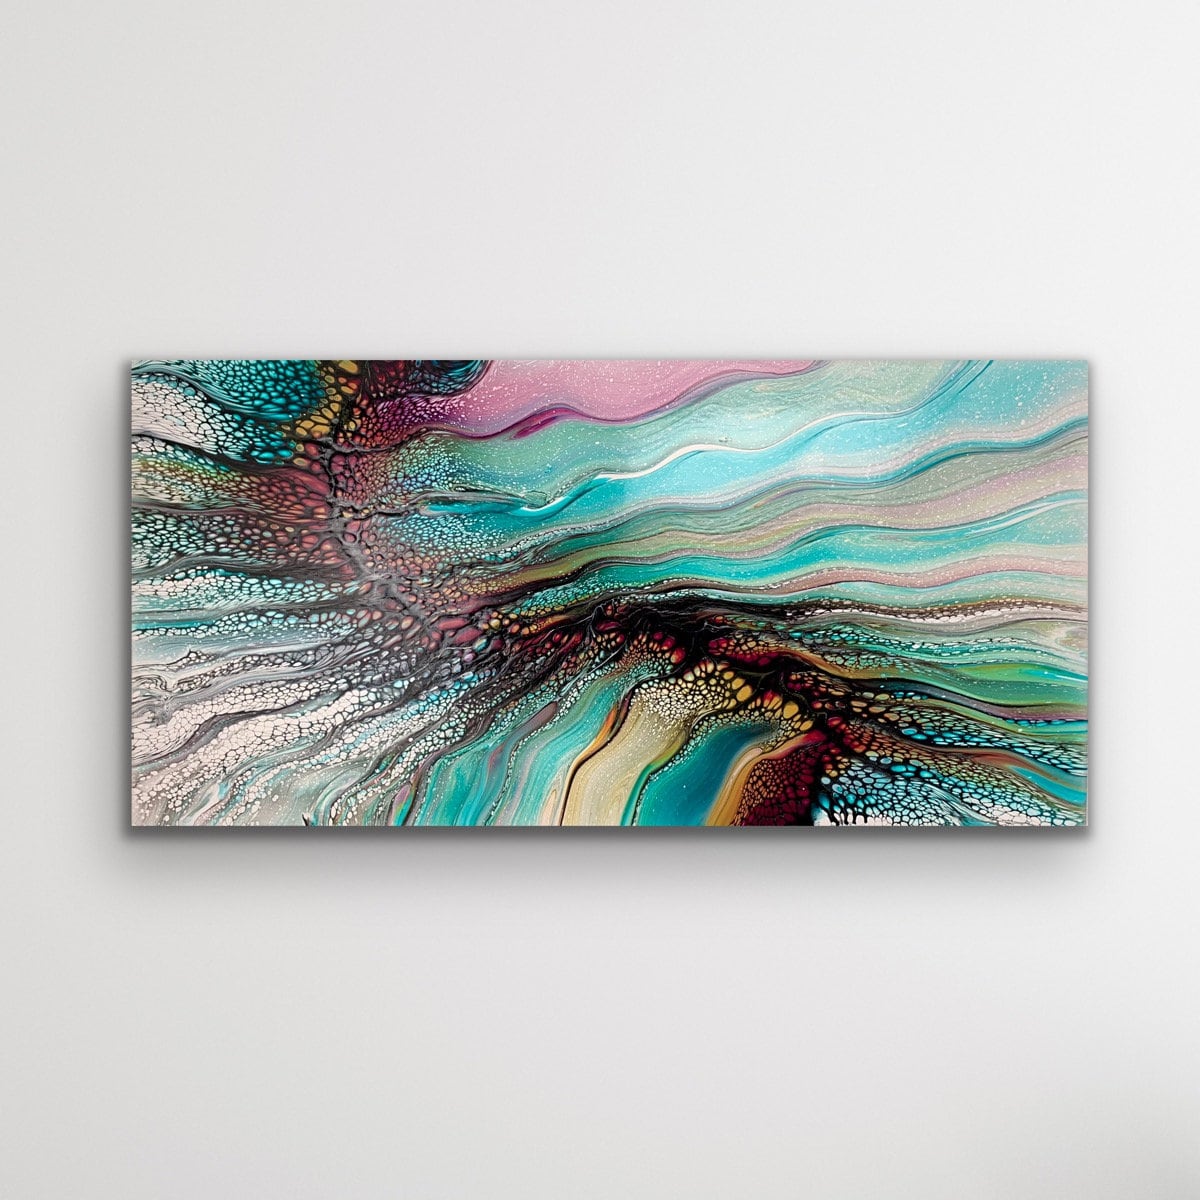 ON OFFER Framed Original Fluid Acrylic Pour With Resin Finish